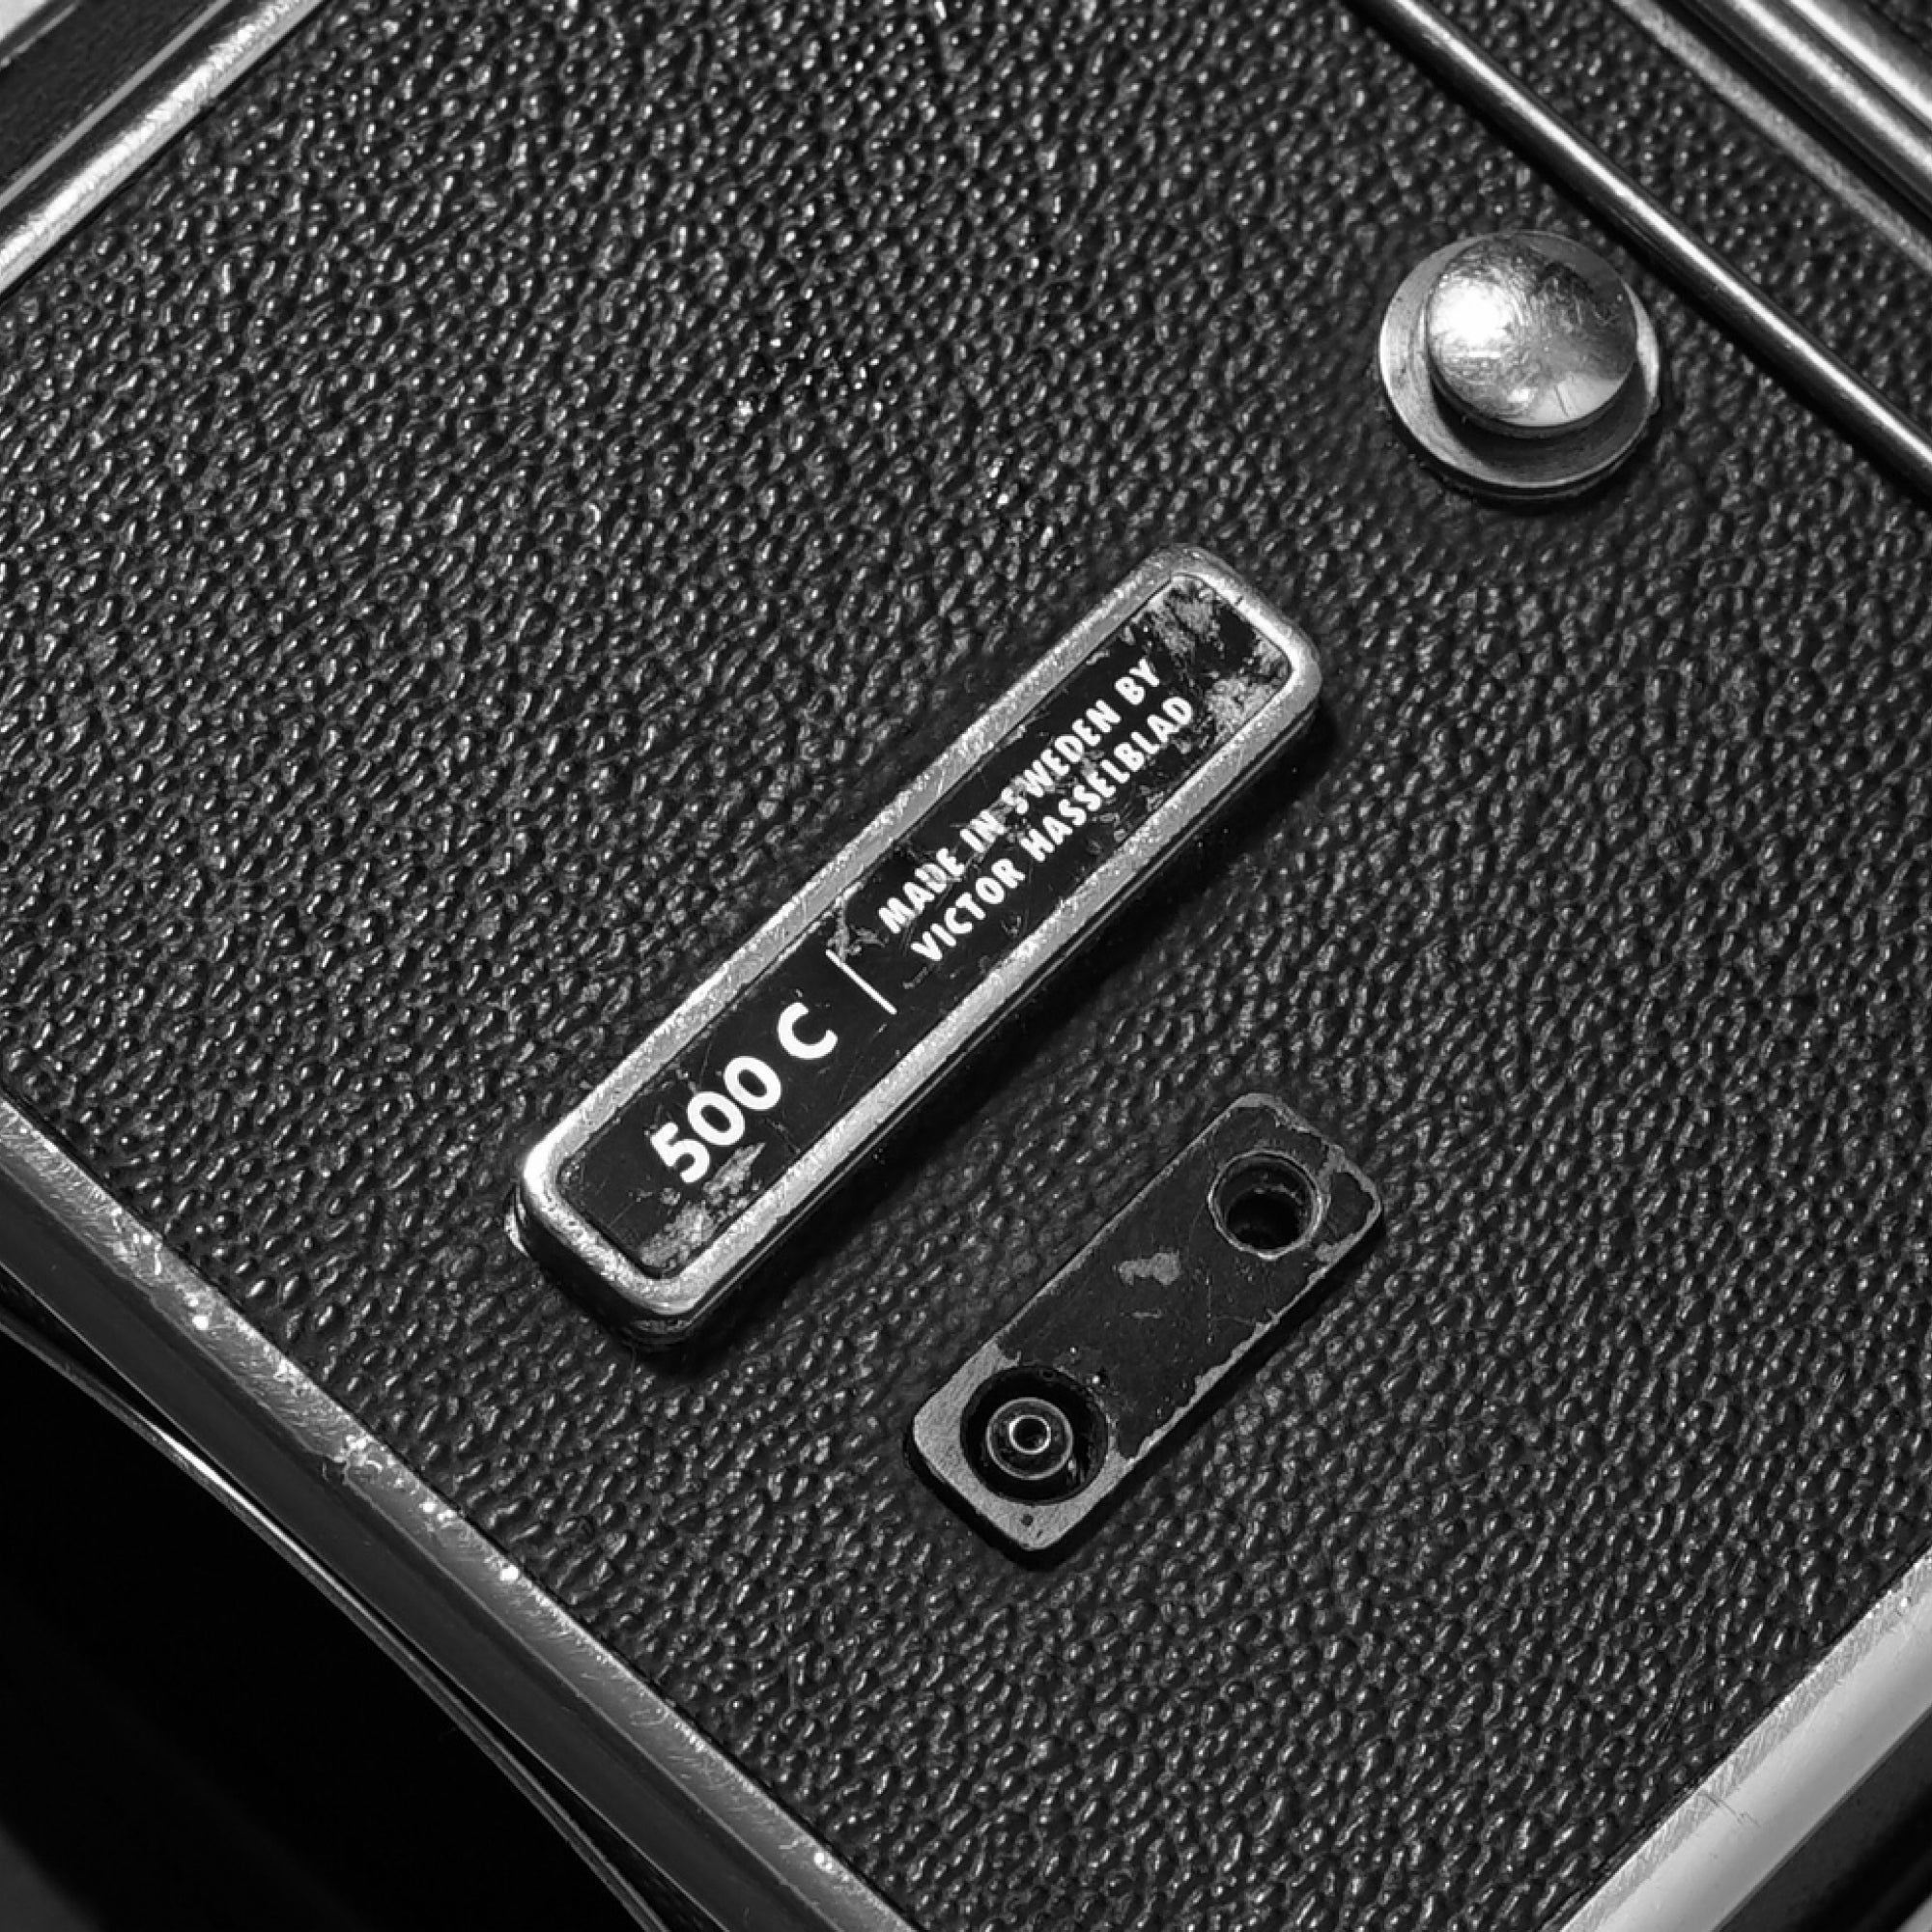 Buy Hasselblad 500 C + Sonnar 150mm f4 now at Analogue Amsterdam